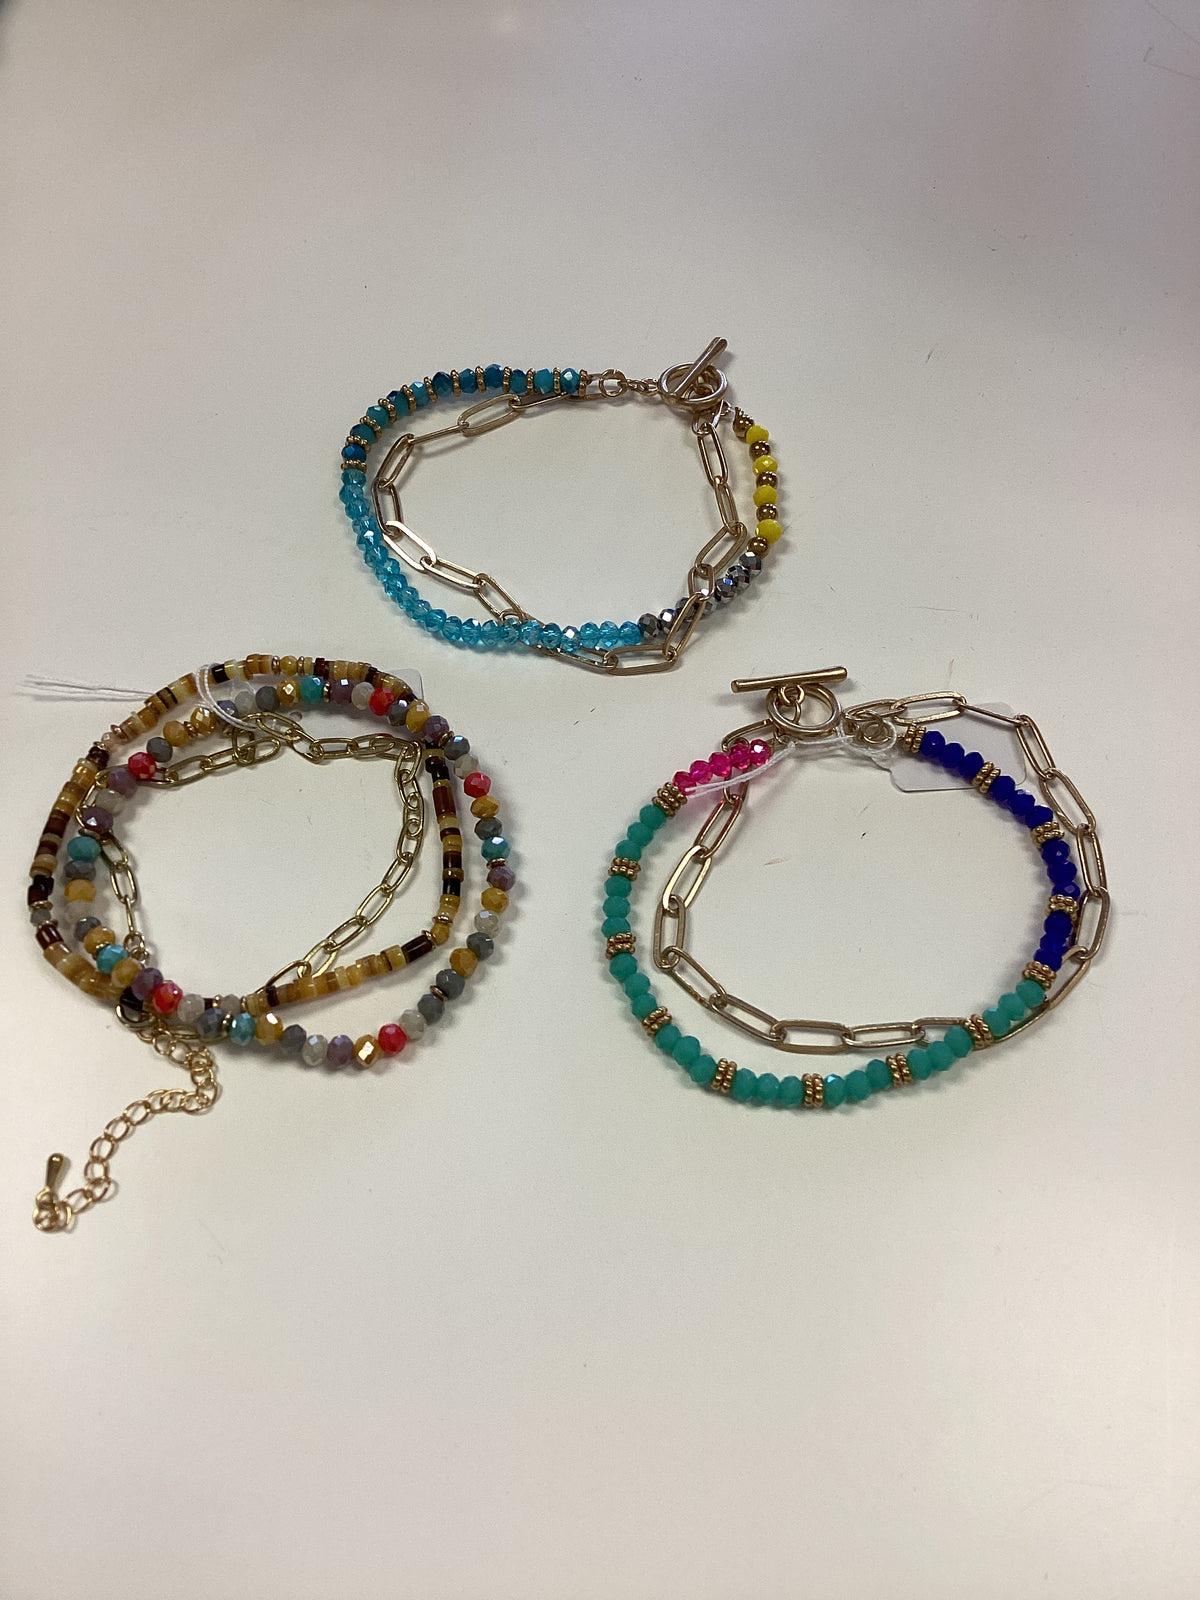 Bracelets-multi colored beads/chain